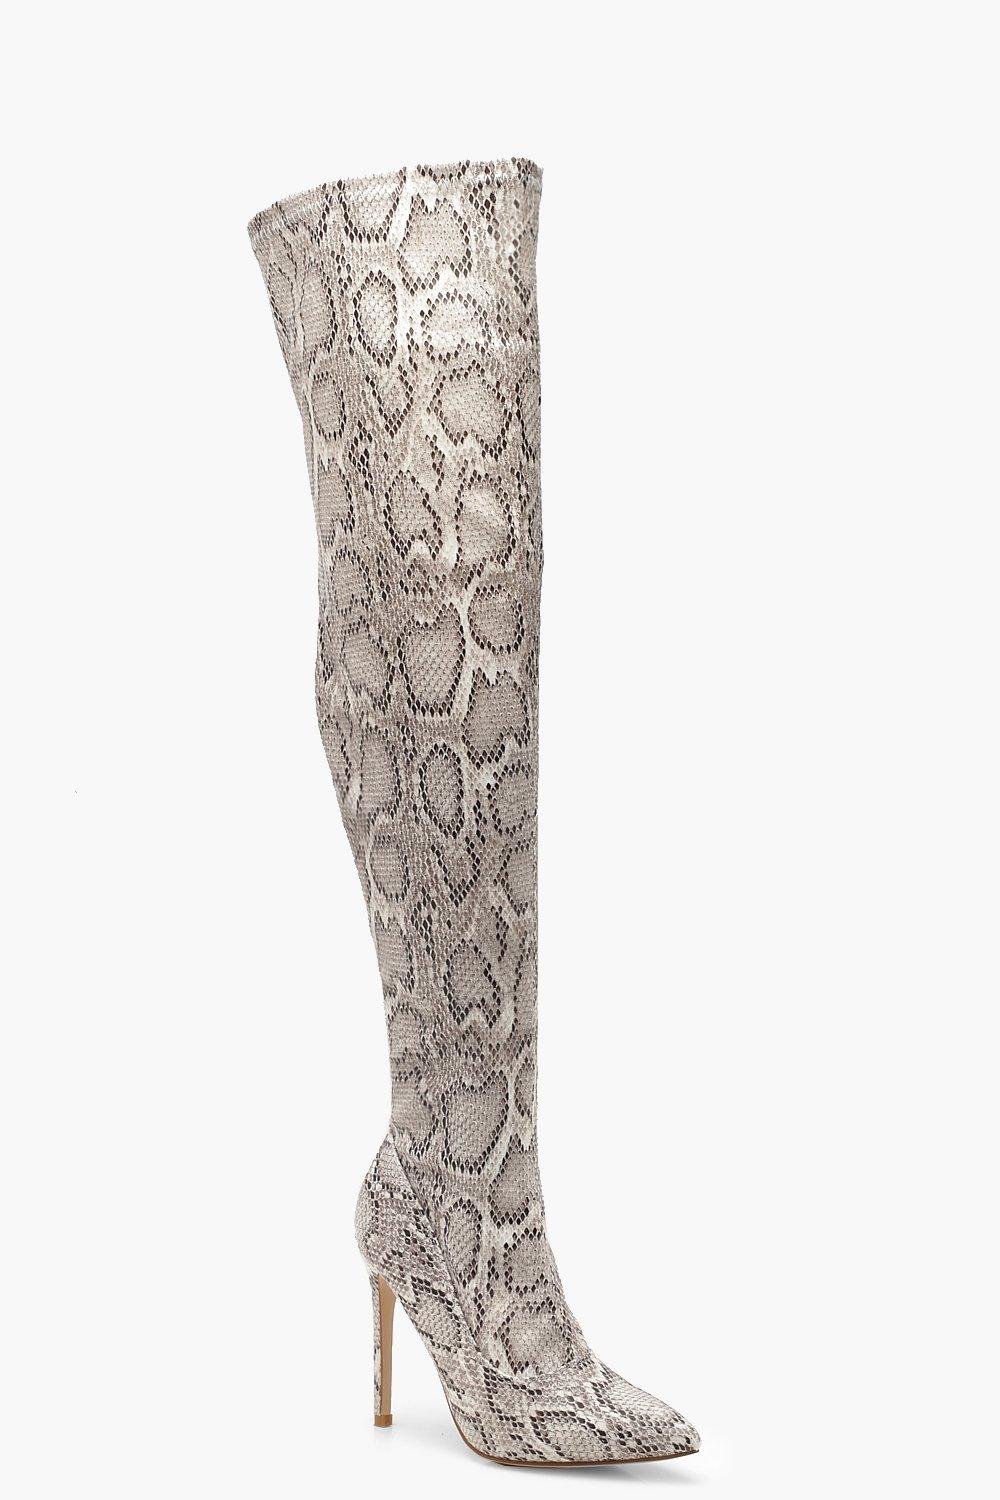 over knee snake boots